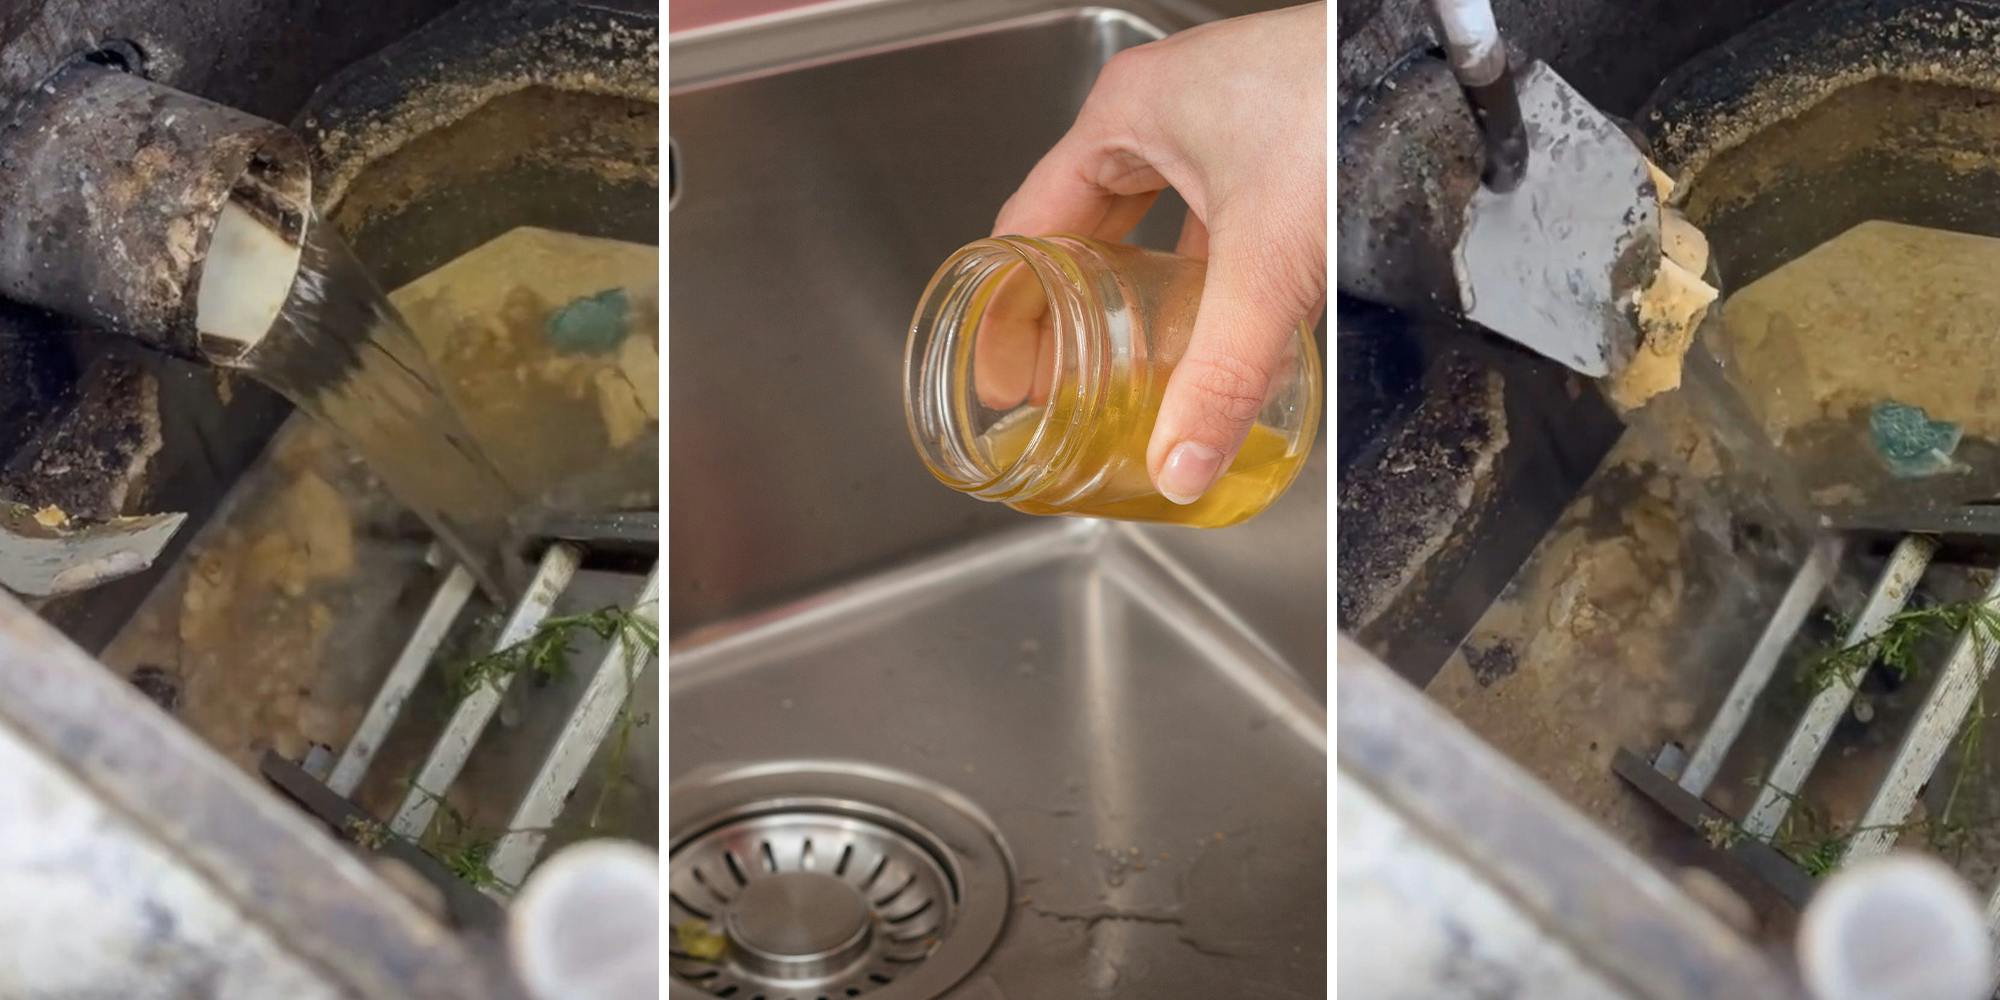 Can I Pour Grease Down the Sink? A Plumber Weighs In